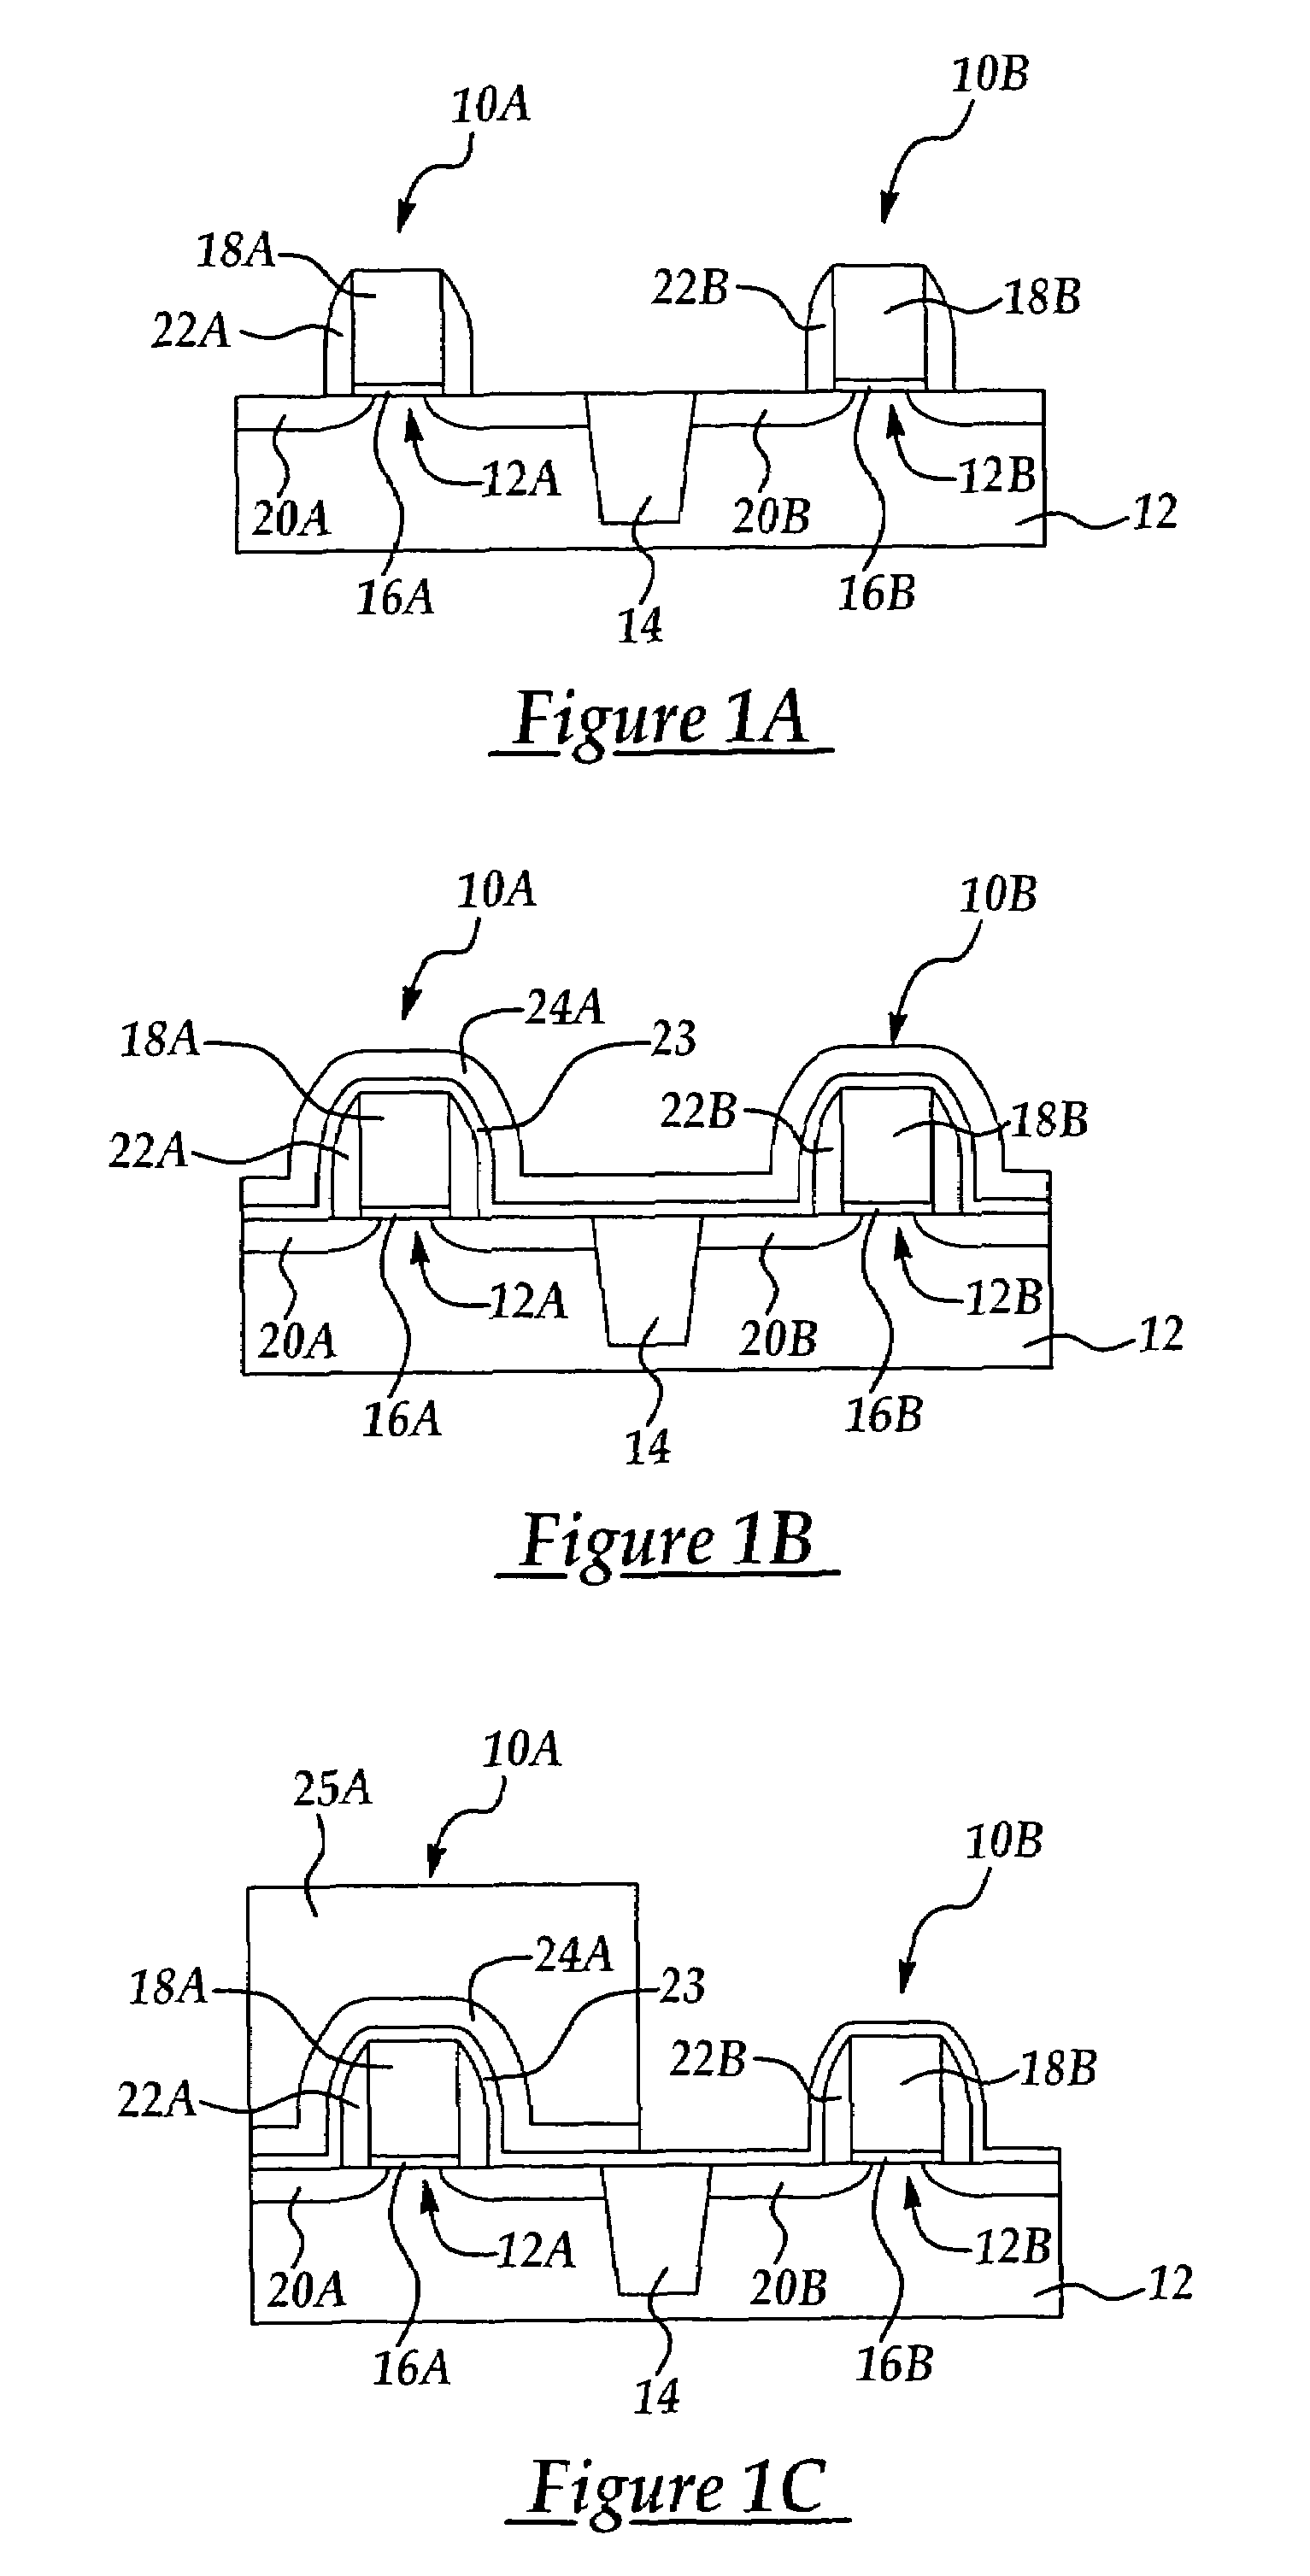 Method for selectively stressing MOSFETs to improve charge carrier mobility